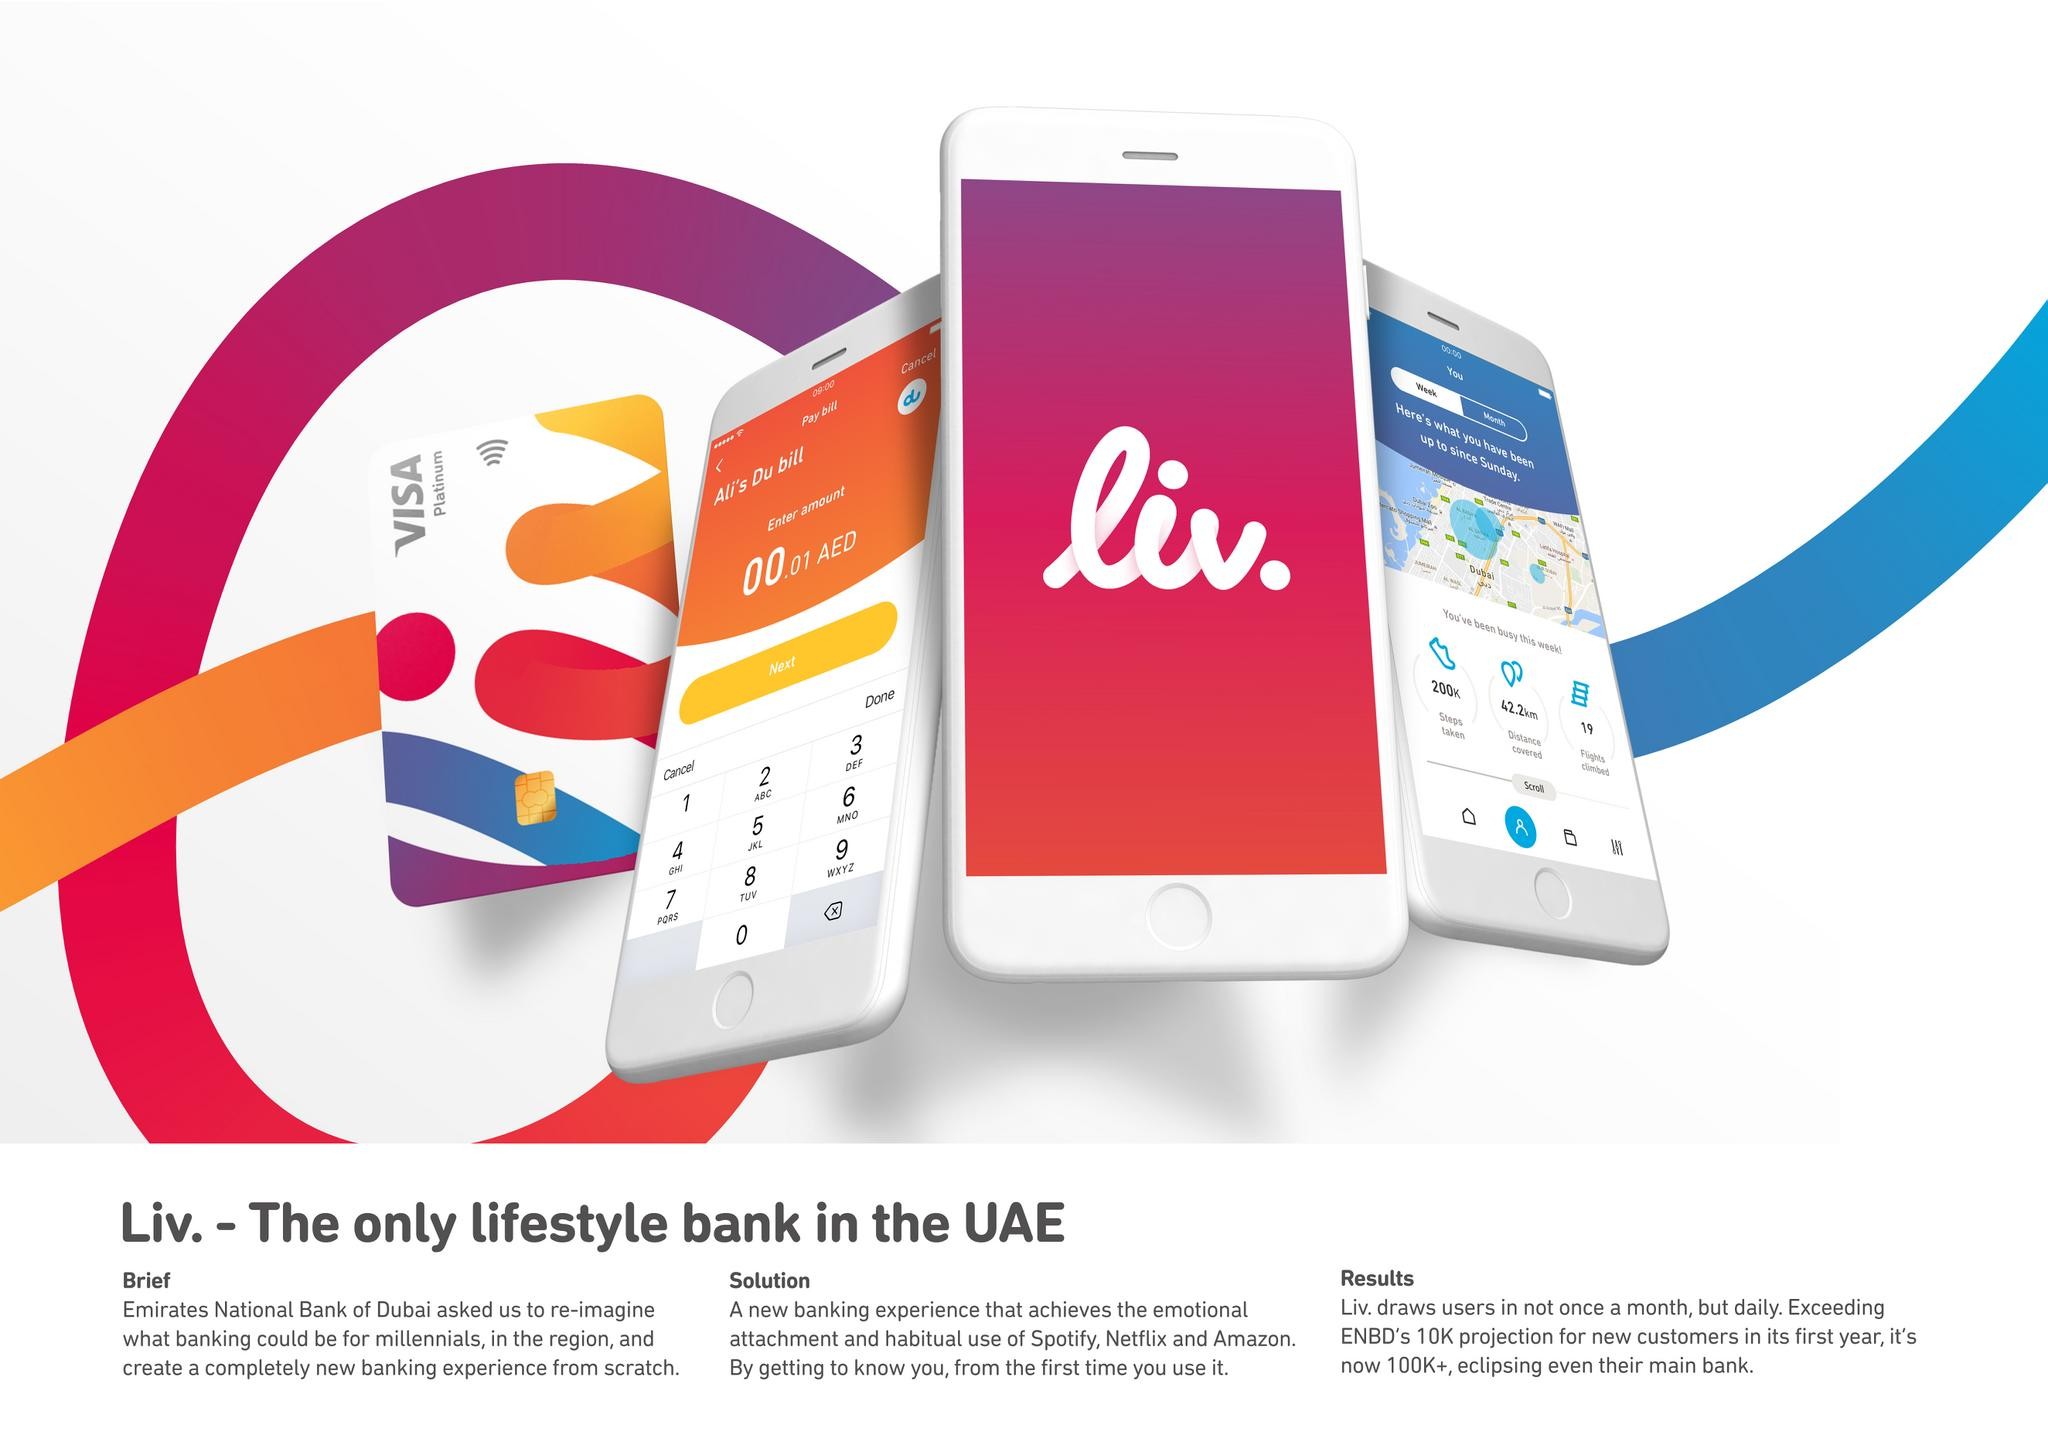 Liv. - The only fully digital lifestyle bank in the UAE